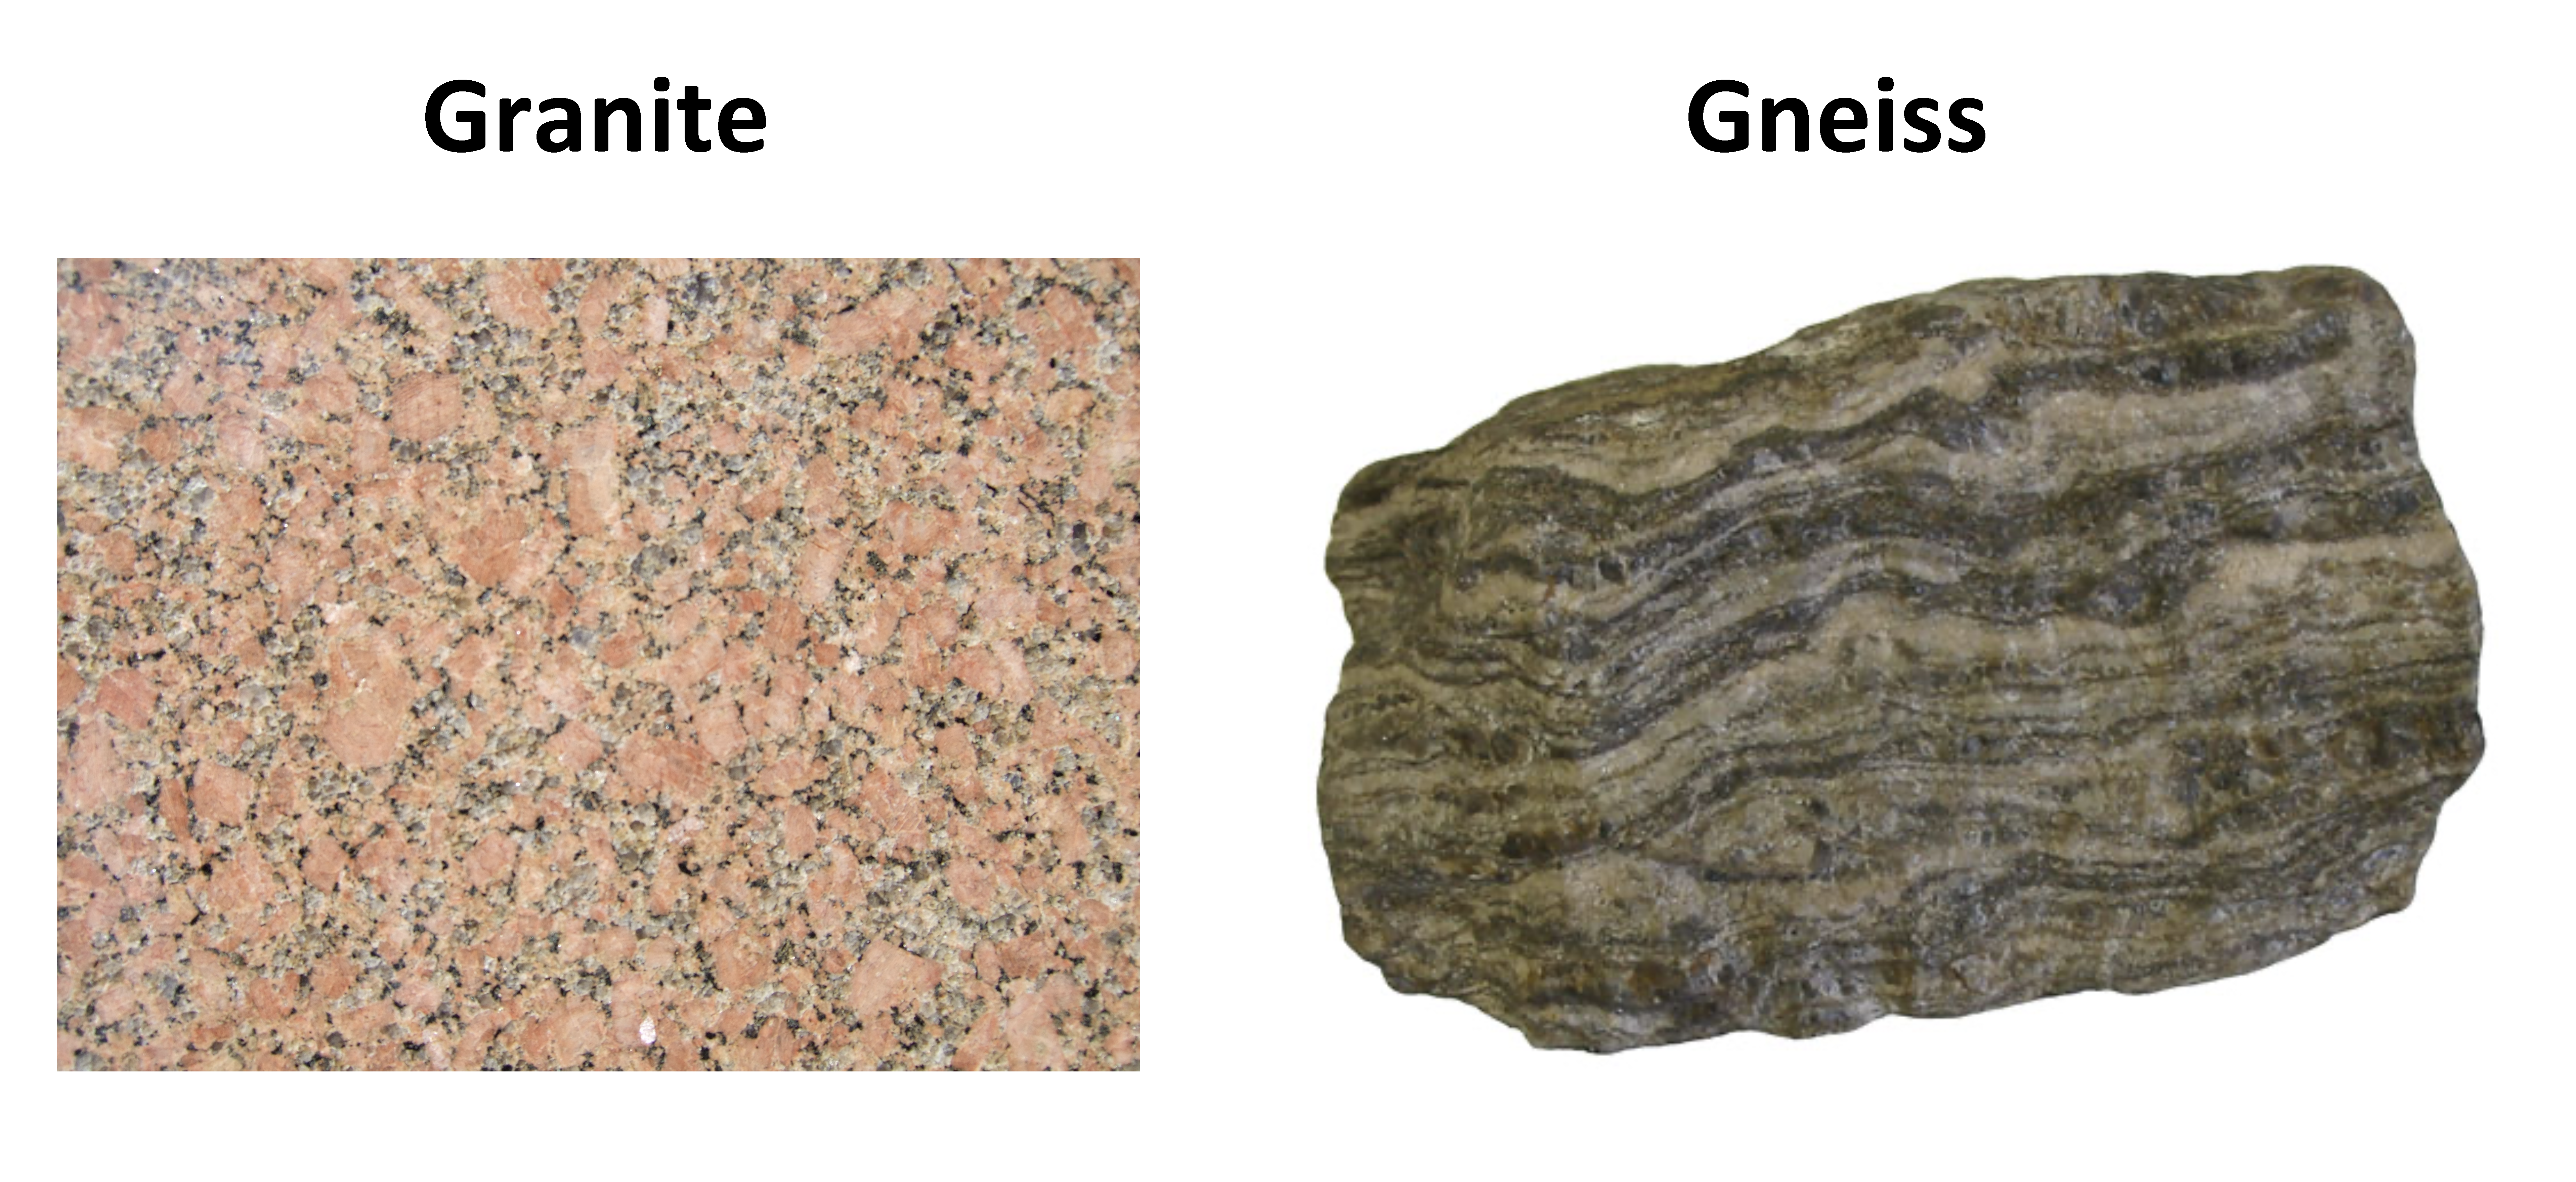 Two rocks with very similar colors. One is a granite and another is a gneiss that has aligned dark minerals.